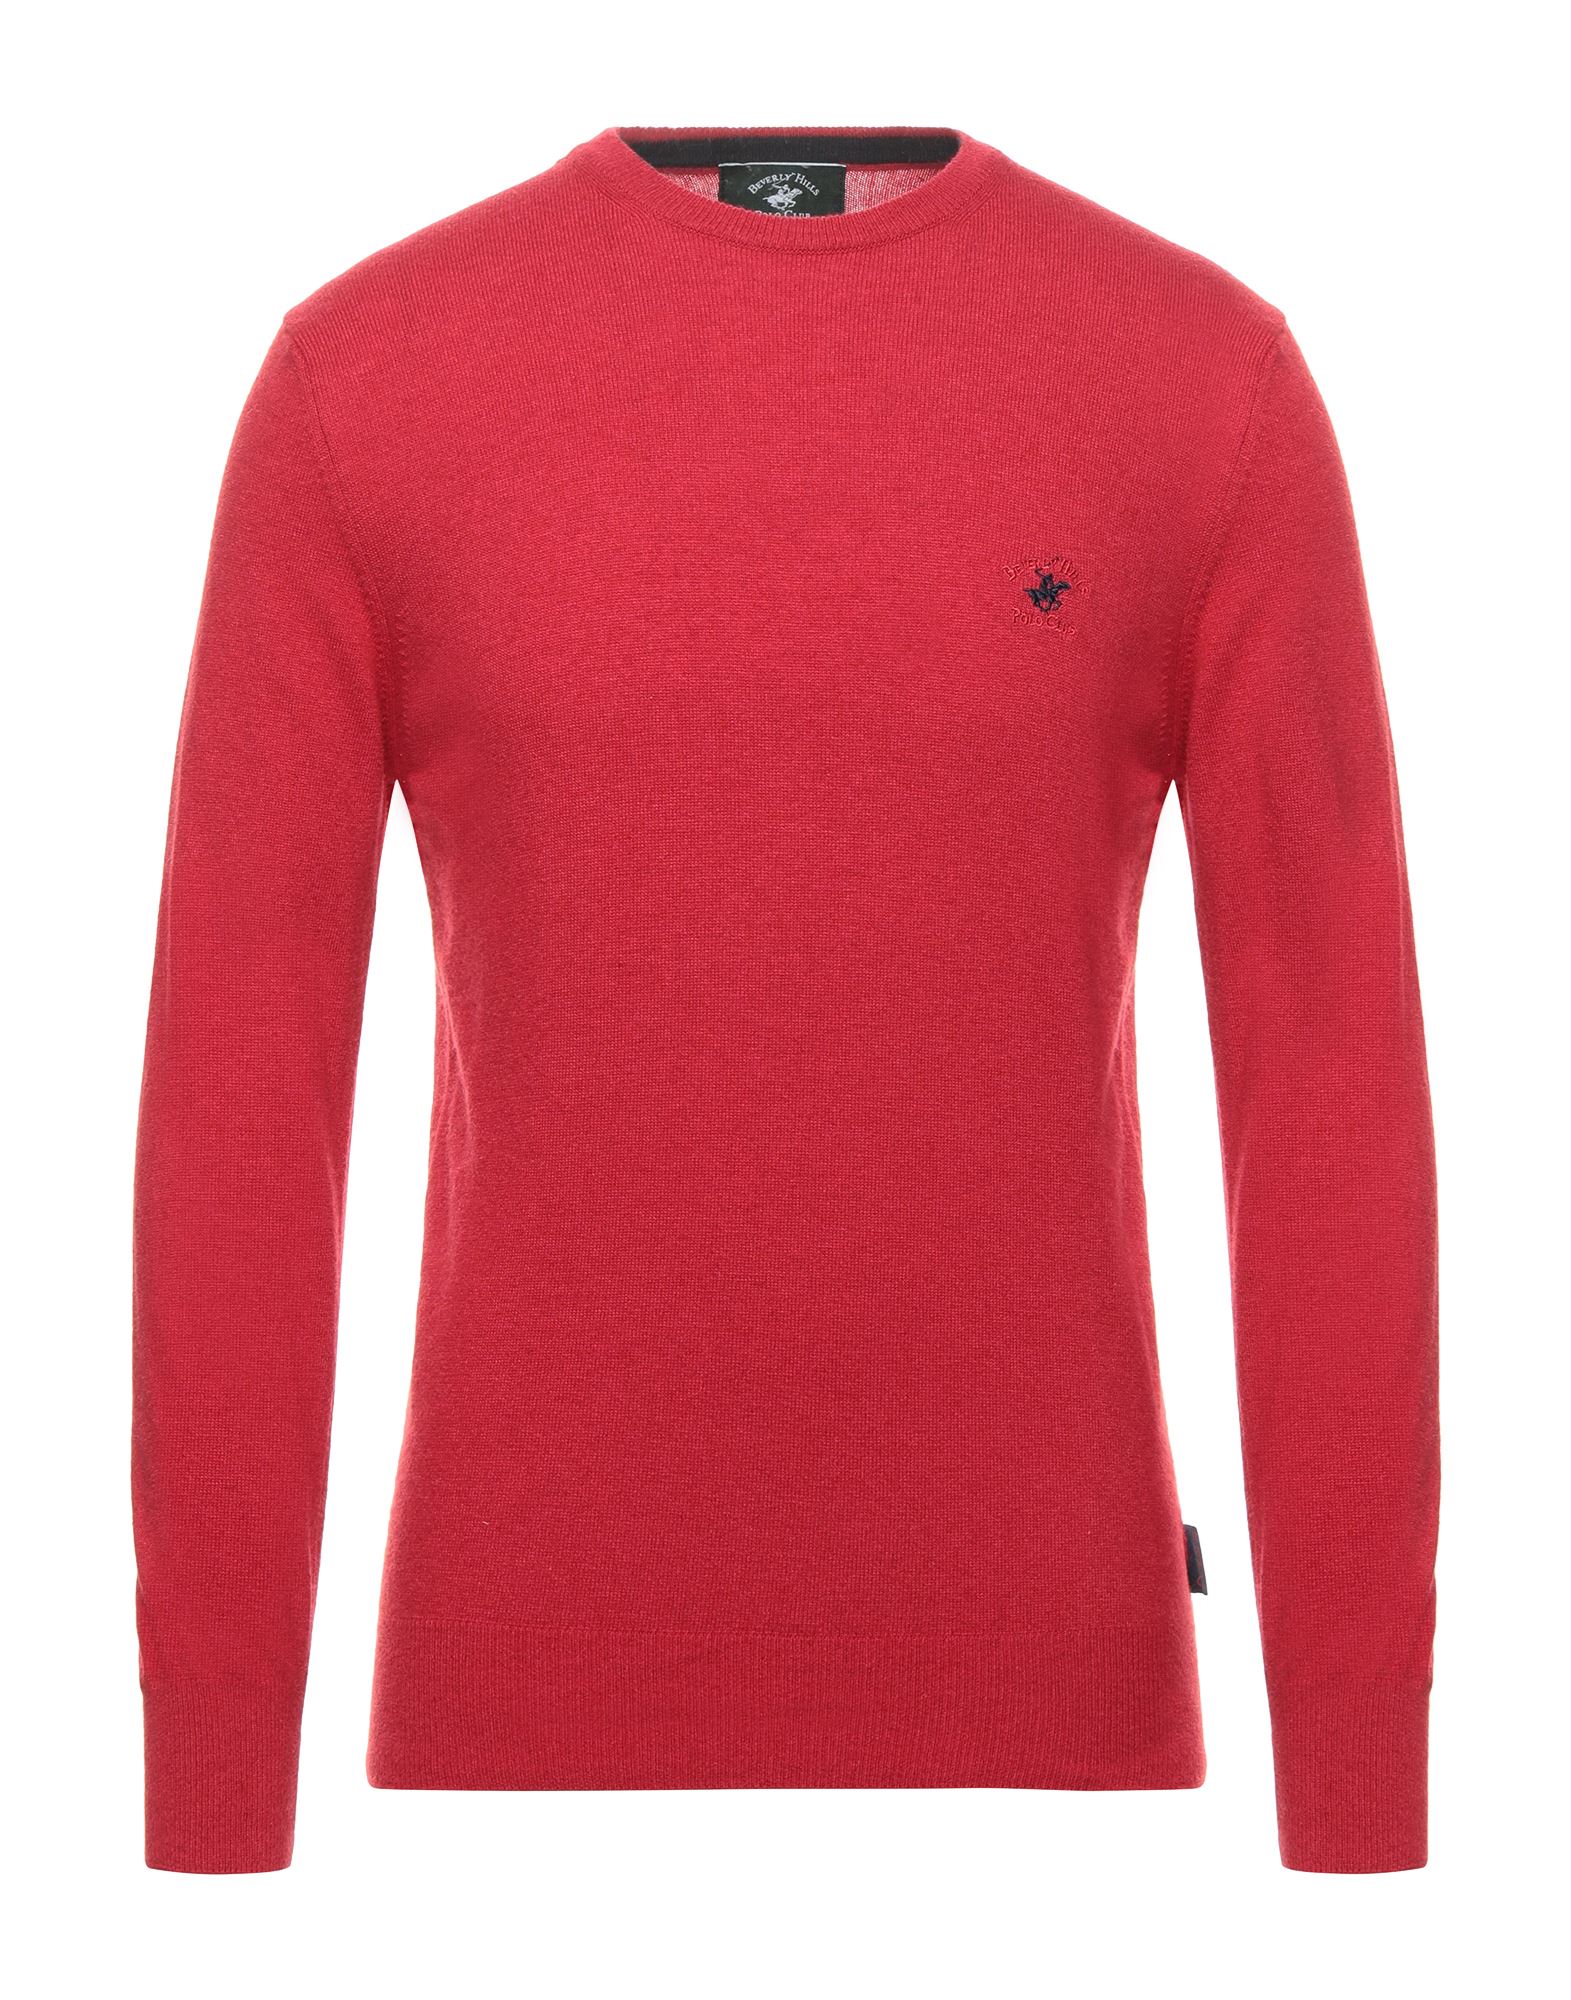 BEVERLY HILLS POLO CLUB Sweaters